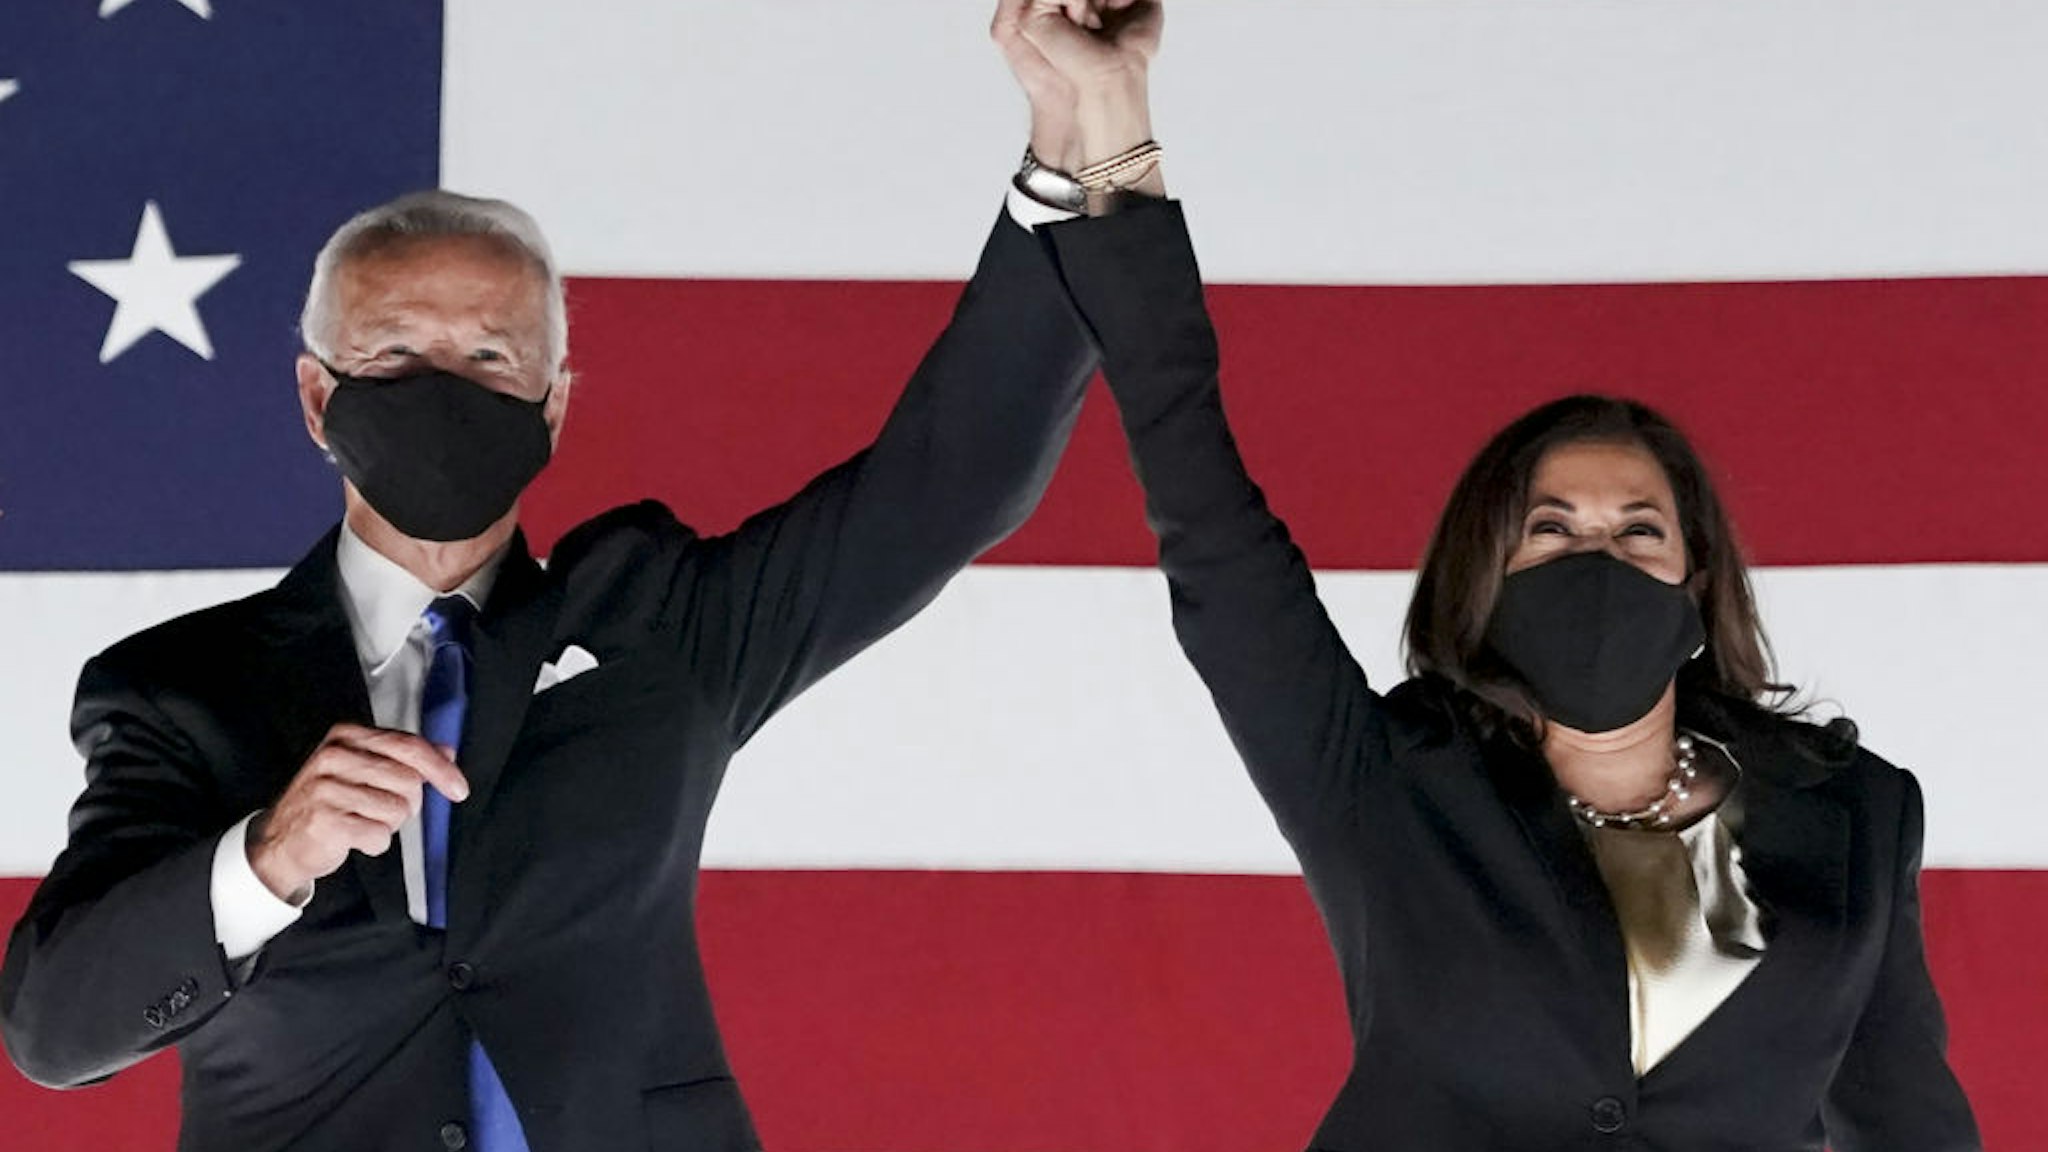 Former Vice President Joe Biden, Democratic presidential nominee, left, and Senator Kamala Harris, Democratic vice presidential nominee, wear protective masks while holding hands outside the Chase Center during the Democratic National Convention in Wilmington, Delaware, U.S., on Thursday, Aug. 20, 2020. Biden accepted the Democratic nomination to challenge President Donald Trump, urging Americans in a prime-time address to vote for new national leadership that will overcome deep U.S. political divisions. Photographer: Stefani Reynolds/Bloomberg